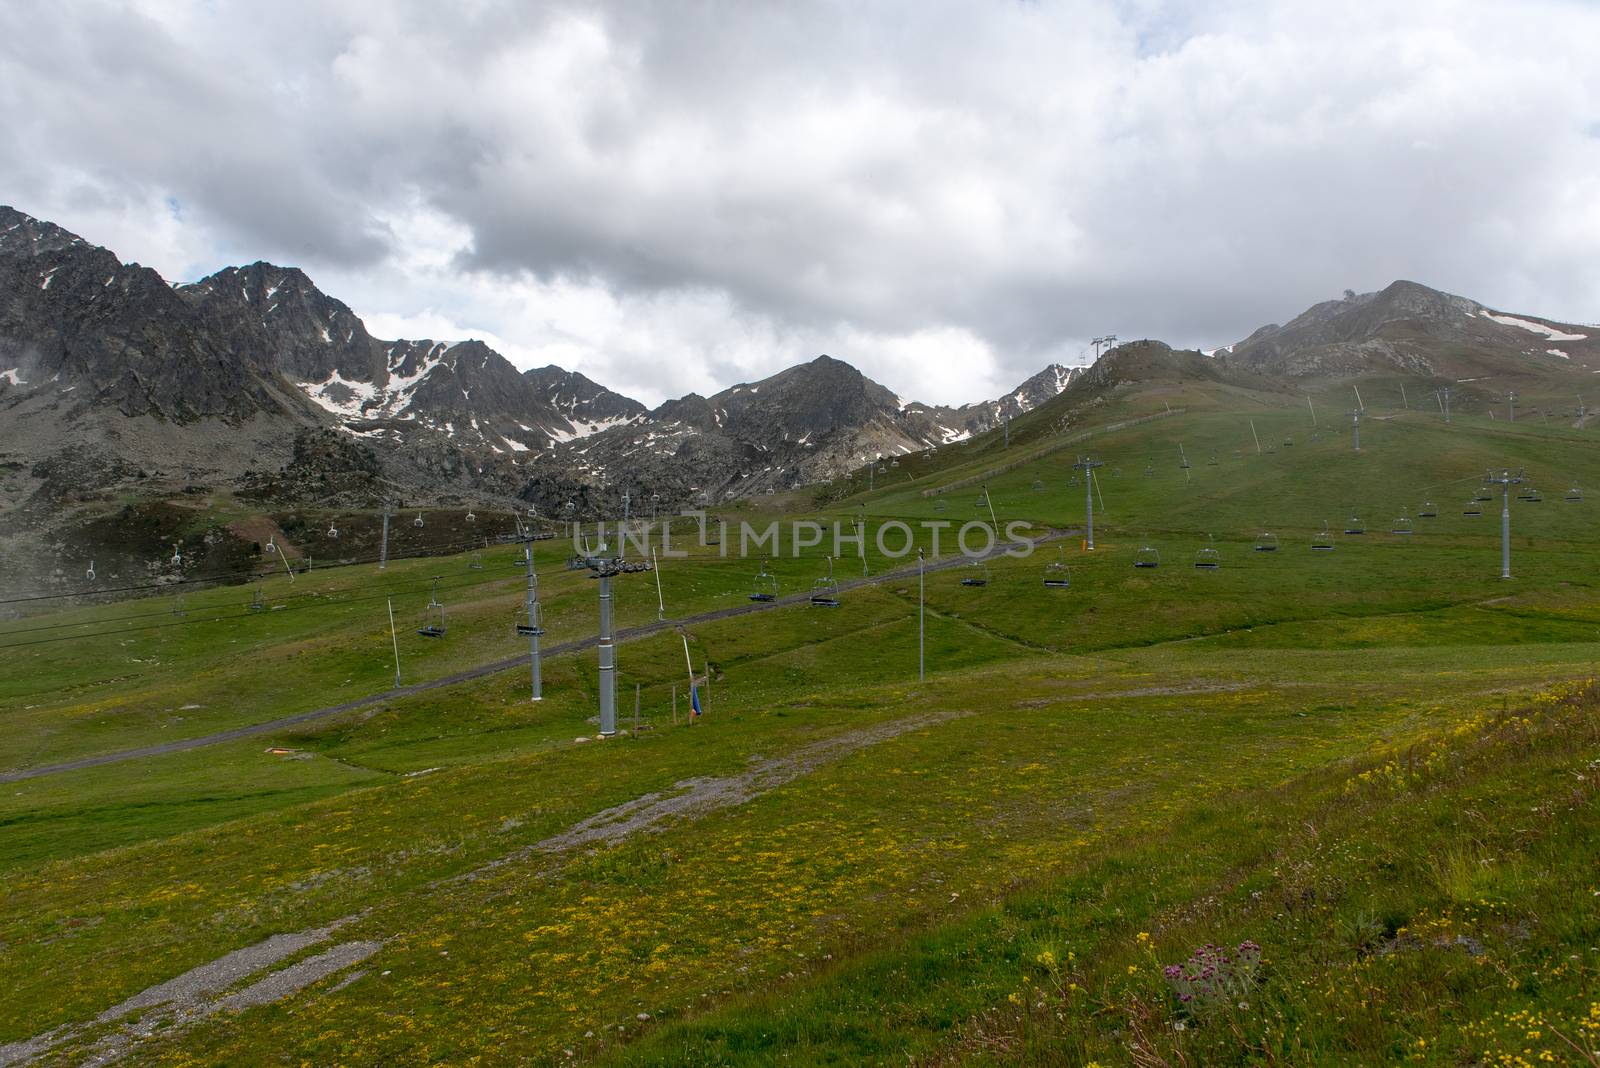 Sunny day with low clouds in the town of Pas de la Casa on the border between France and Andorra in June 2020.